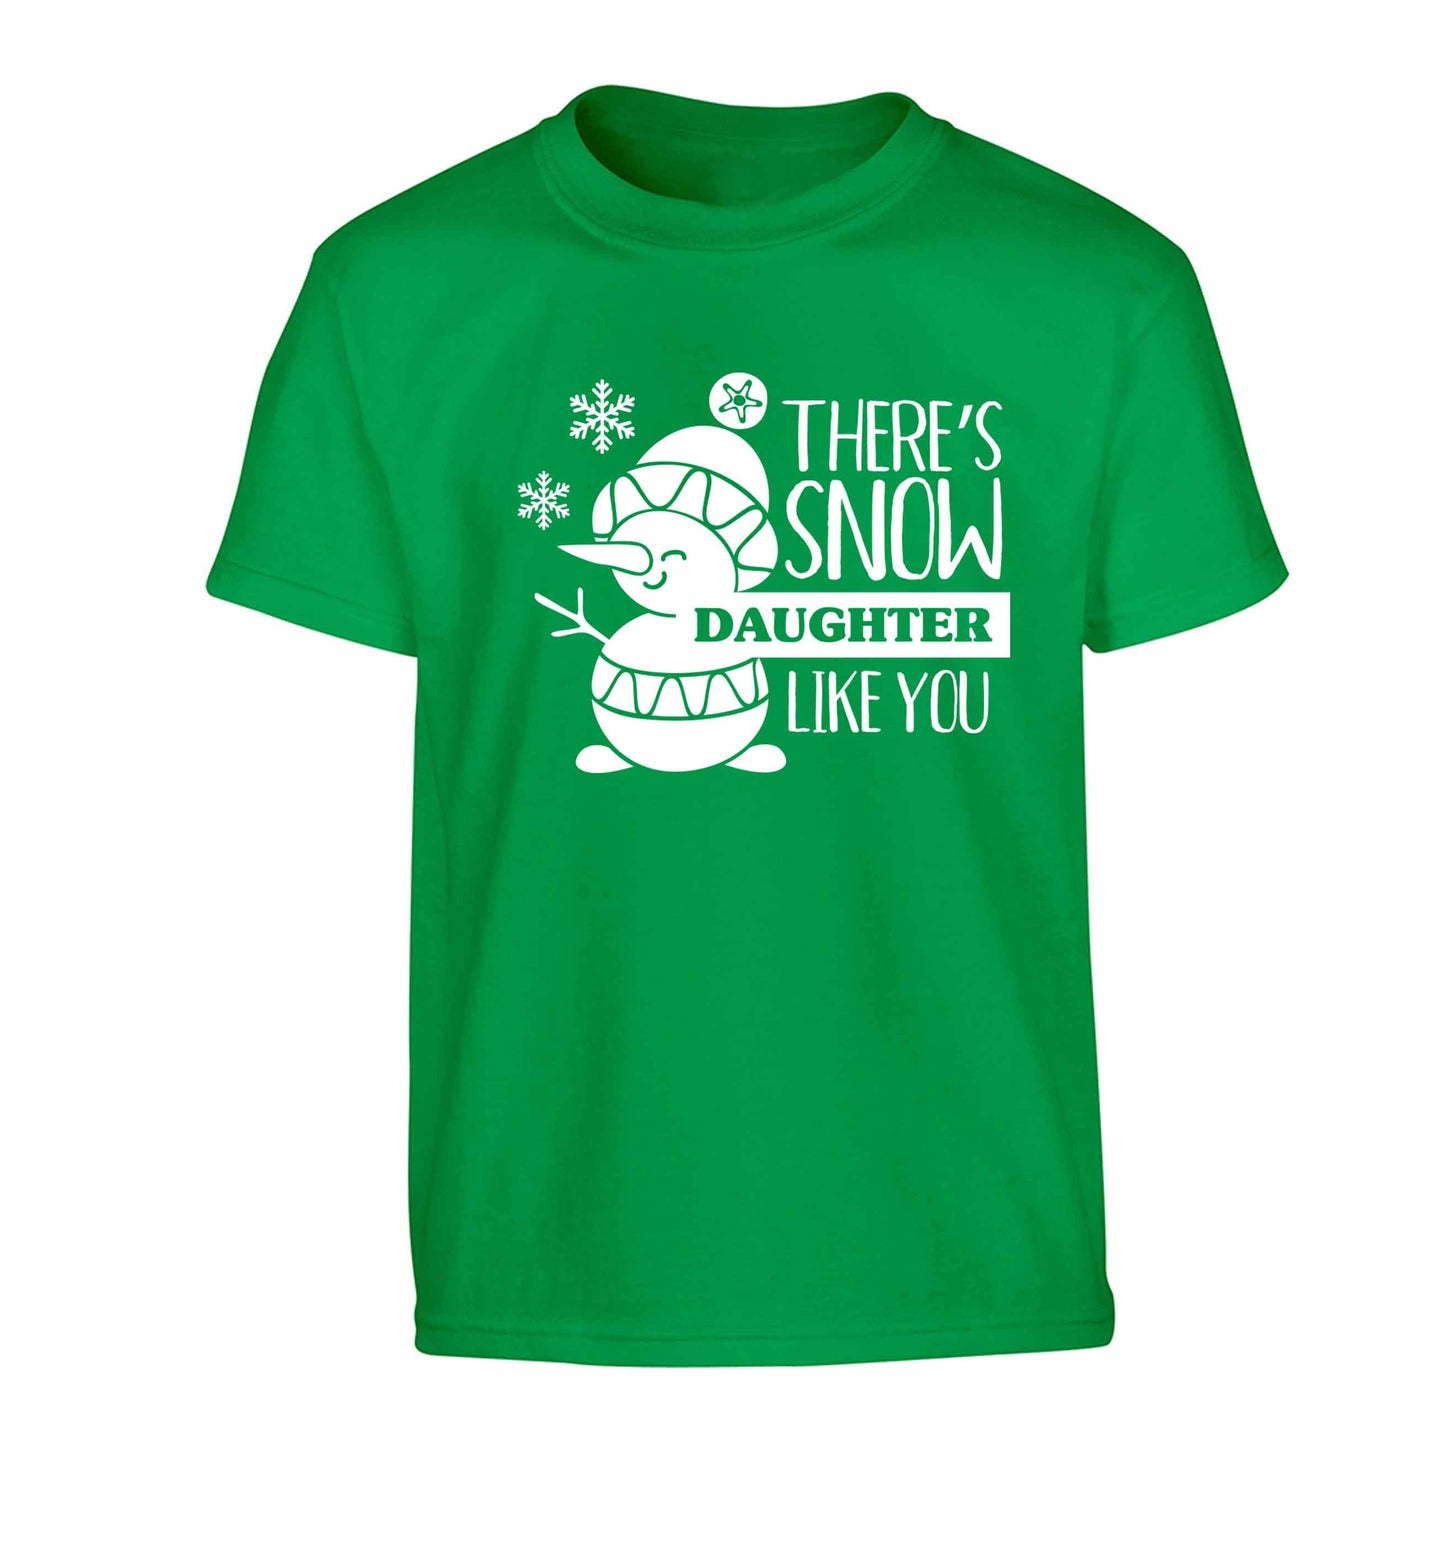 There's snow daughter like you Children's green Tshirt 12-13 Years